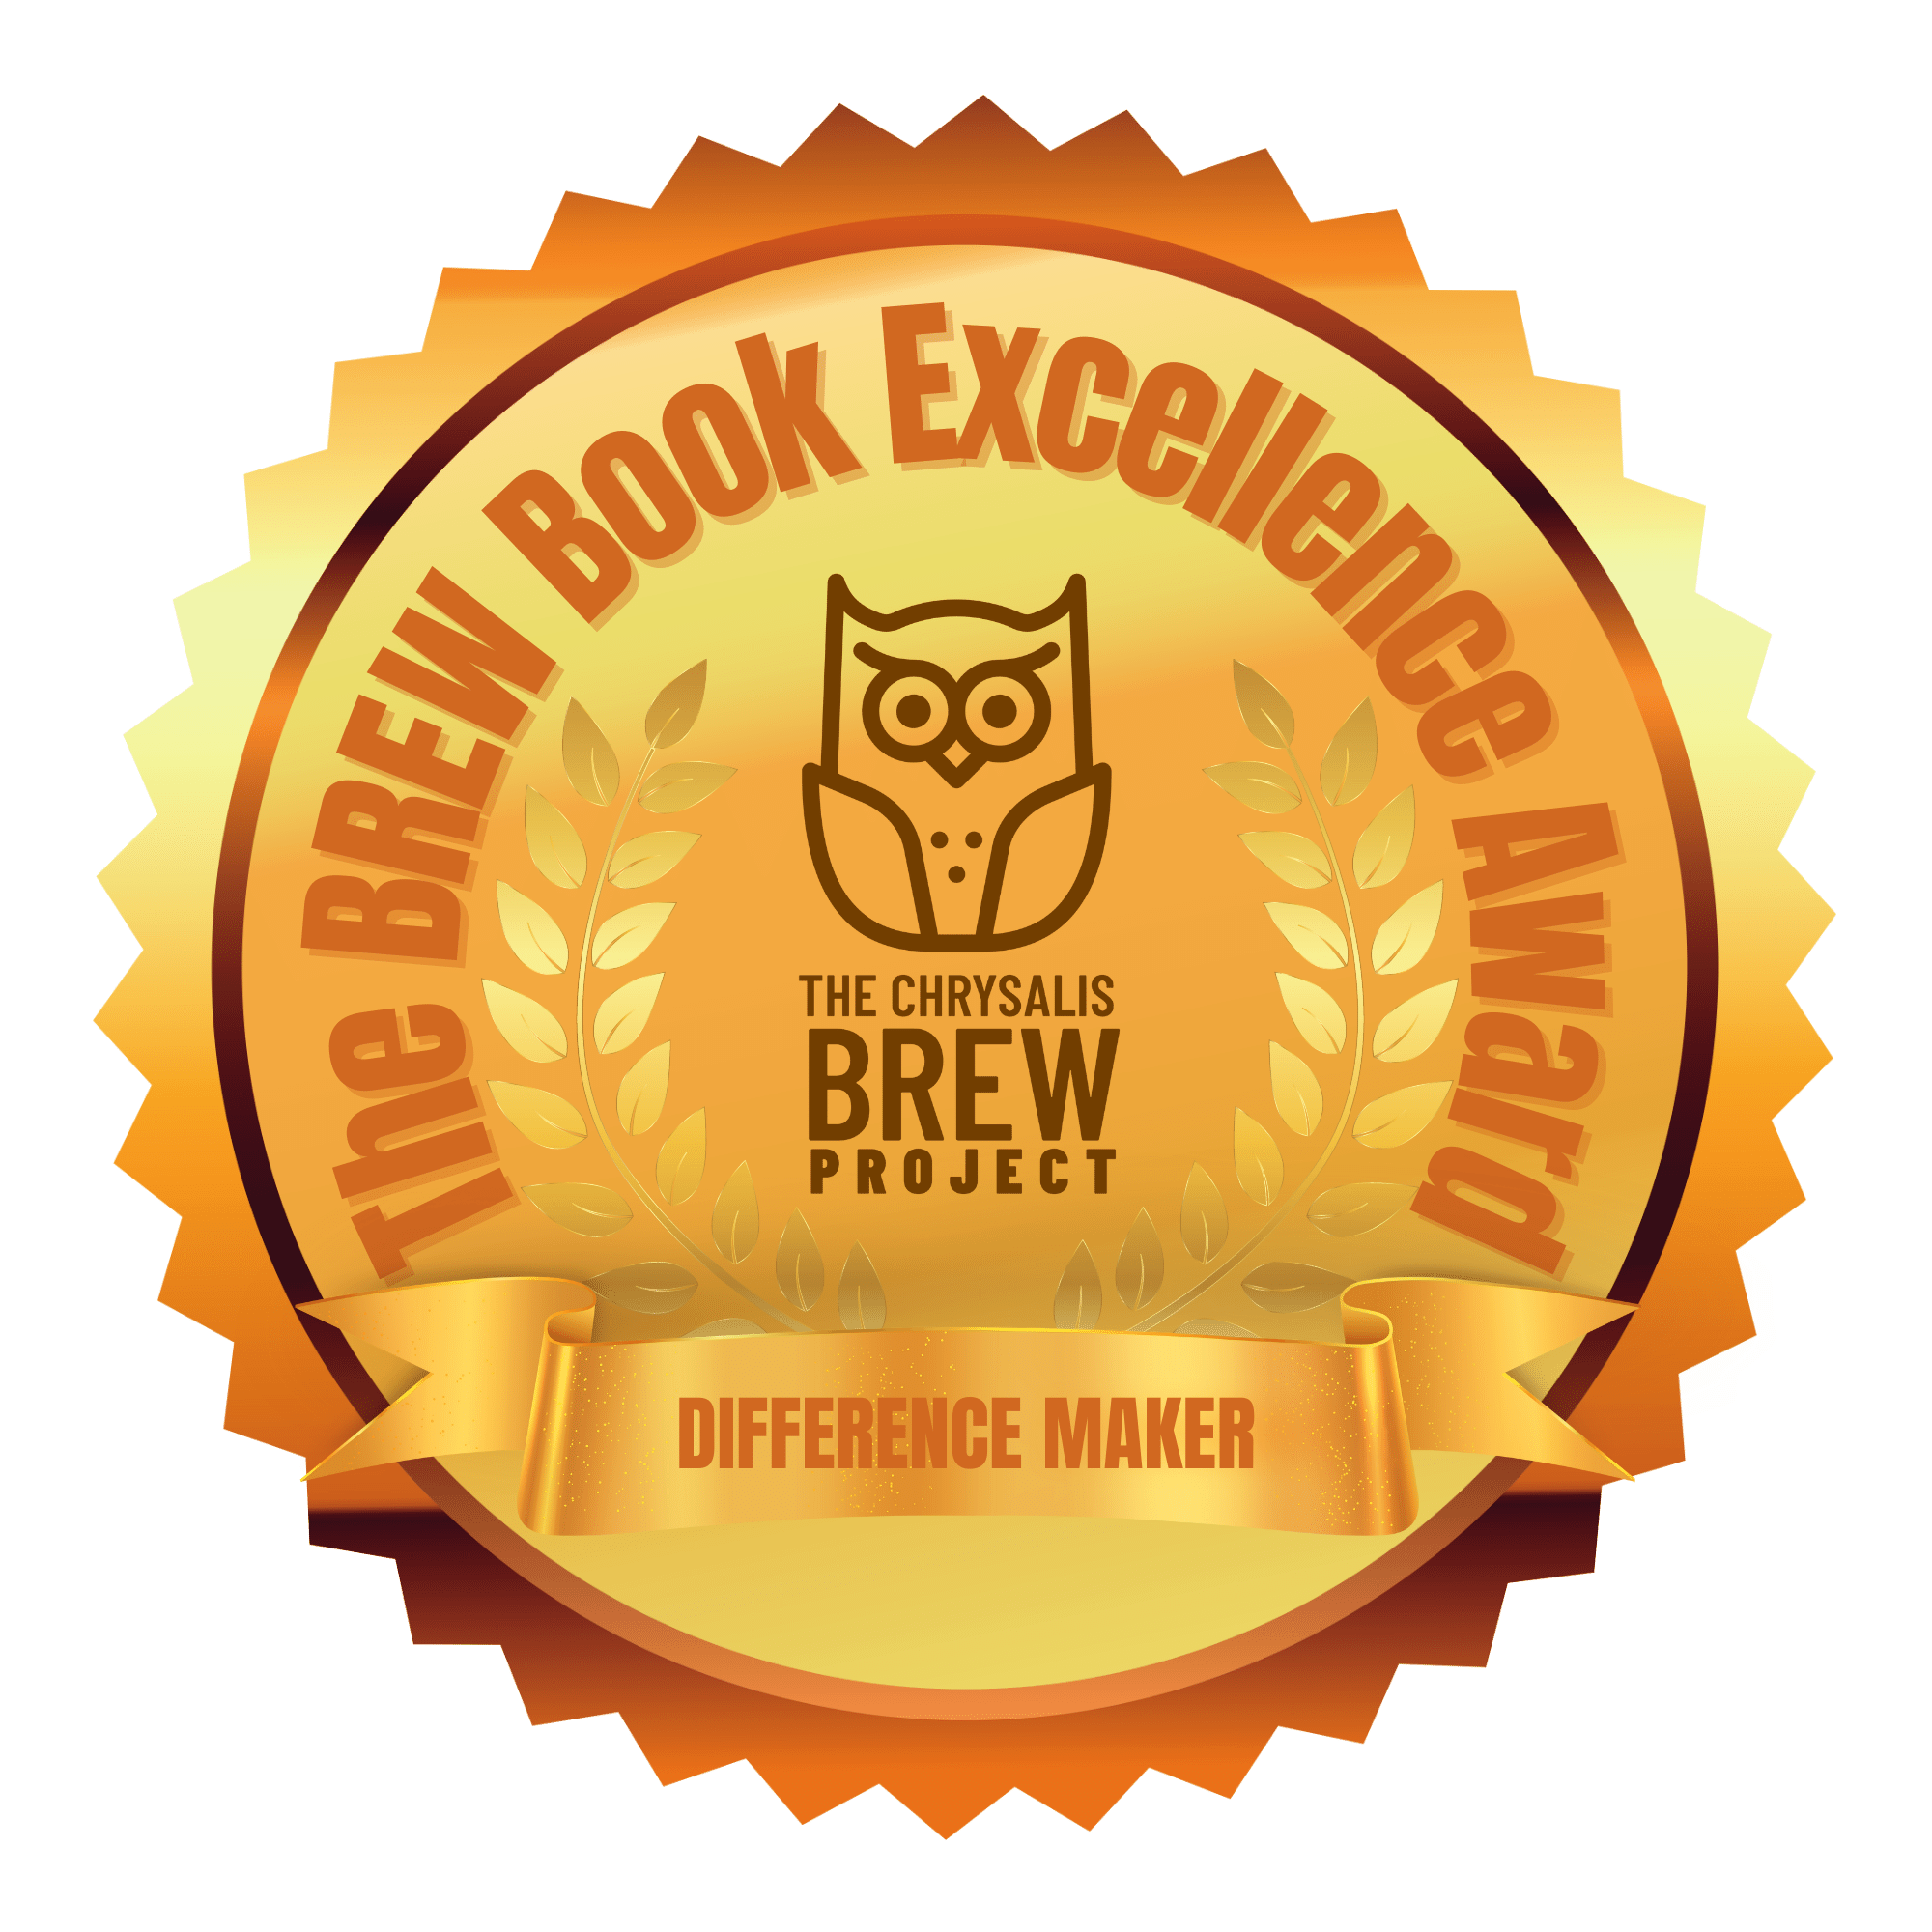 184-the-brew-book-excellence-award-16771905727356.png